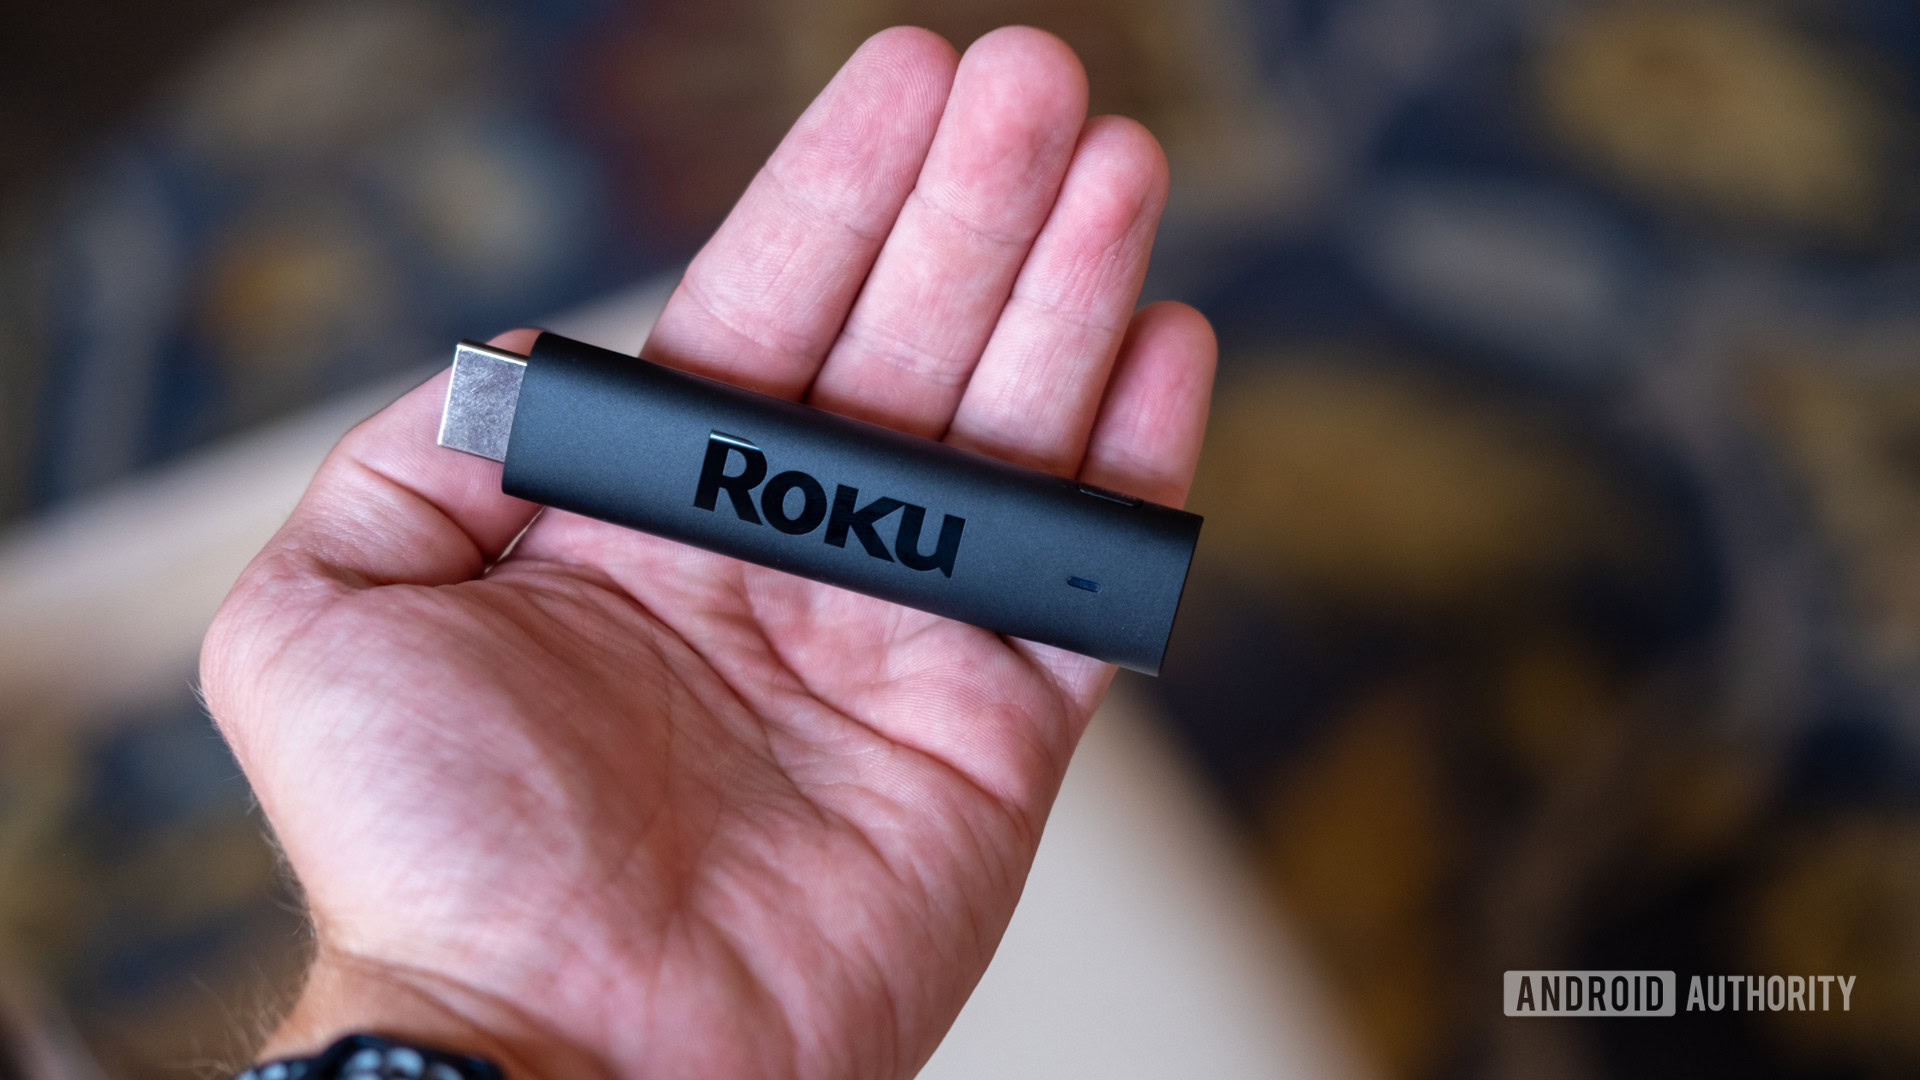 roku streaming stick 4k in hand - The best media streaming devices